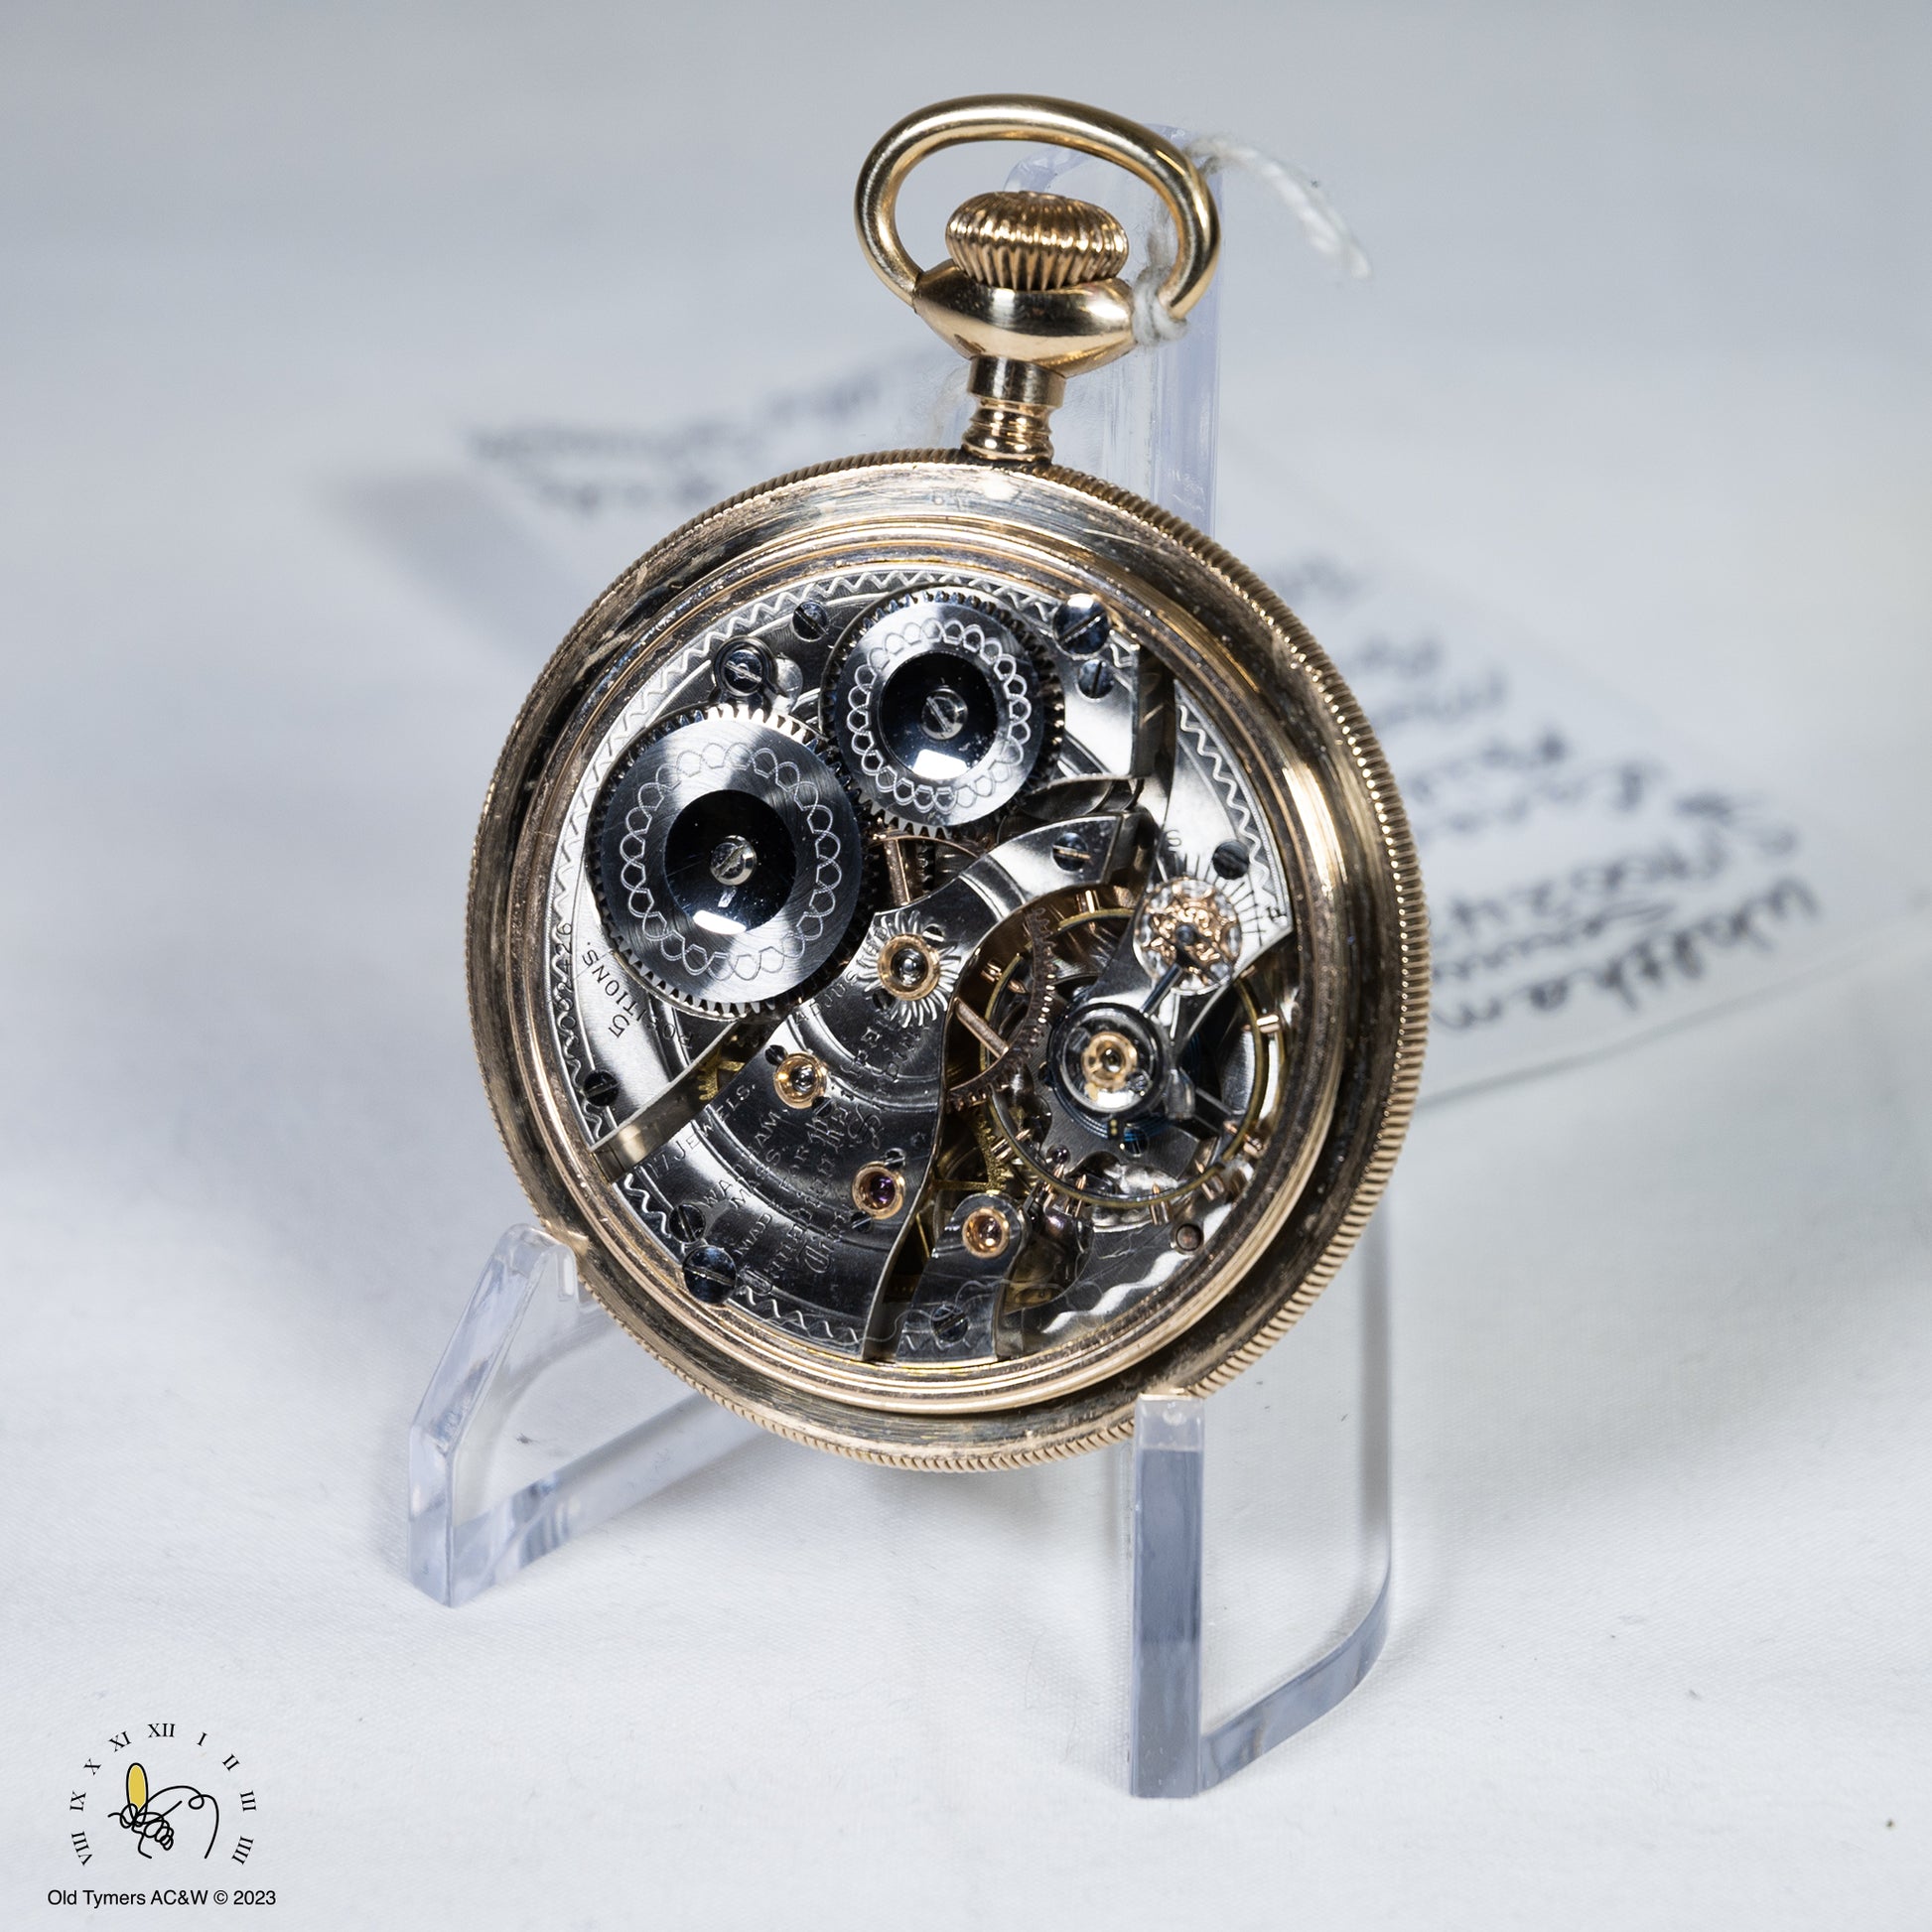 Canadian Railroad Time Service Pocket Watch